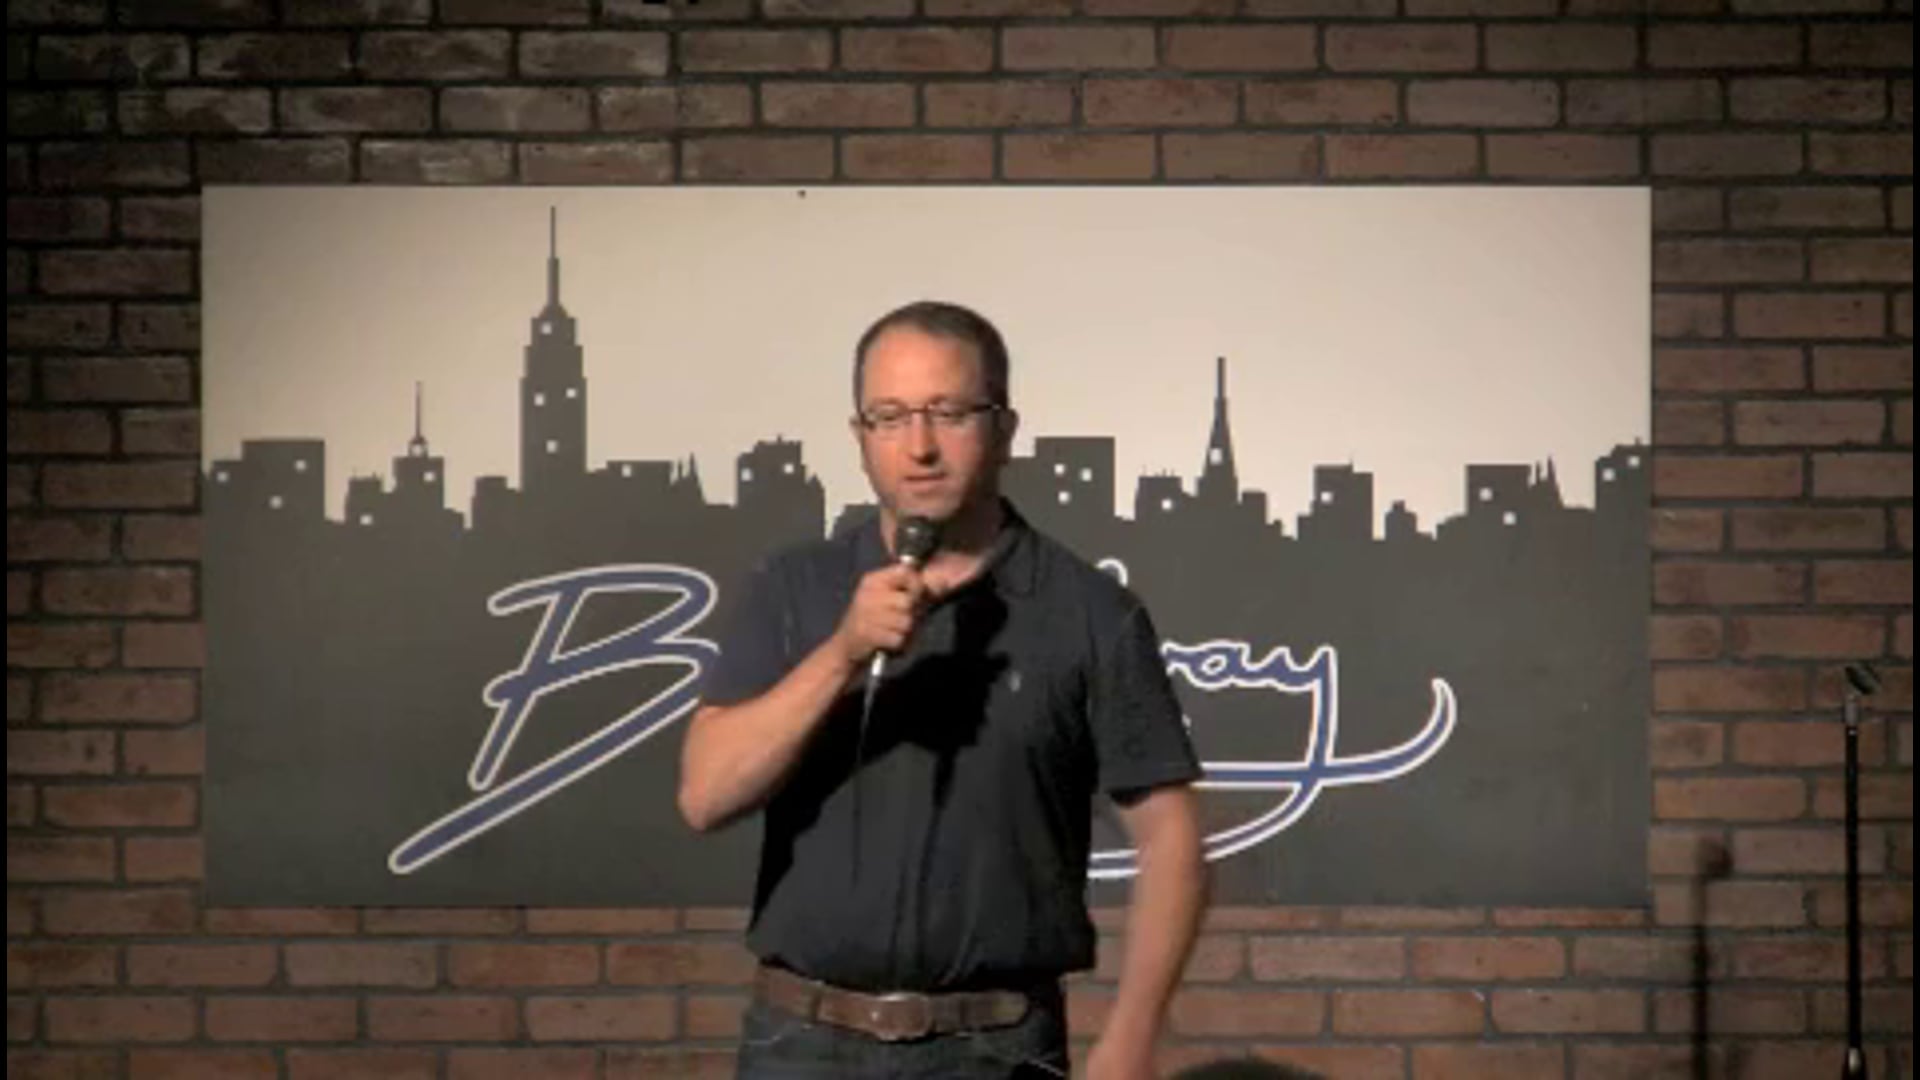 Promotional video thumbnail 1 for Business Owner Turned Stand-Up Comic